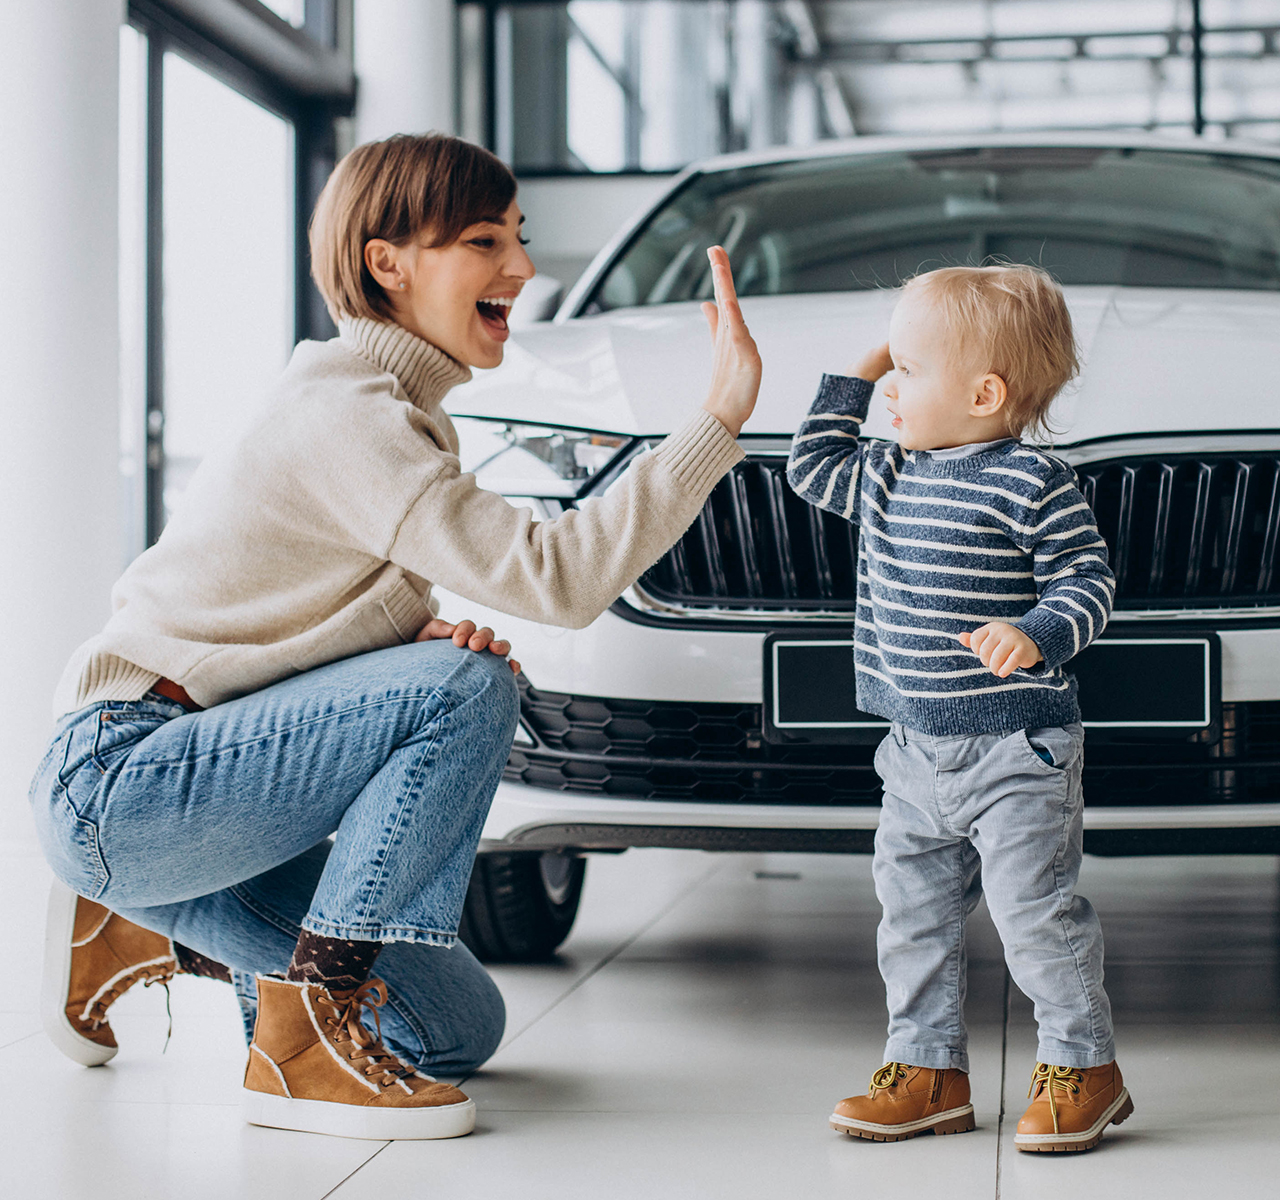 https://galanopouloscarservice.gr/wp-content/uploads/2022/08/woman-with-baby-son-choosing-car-car-salon.jpg